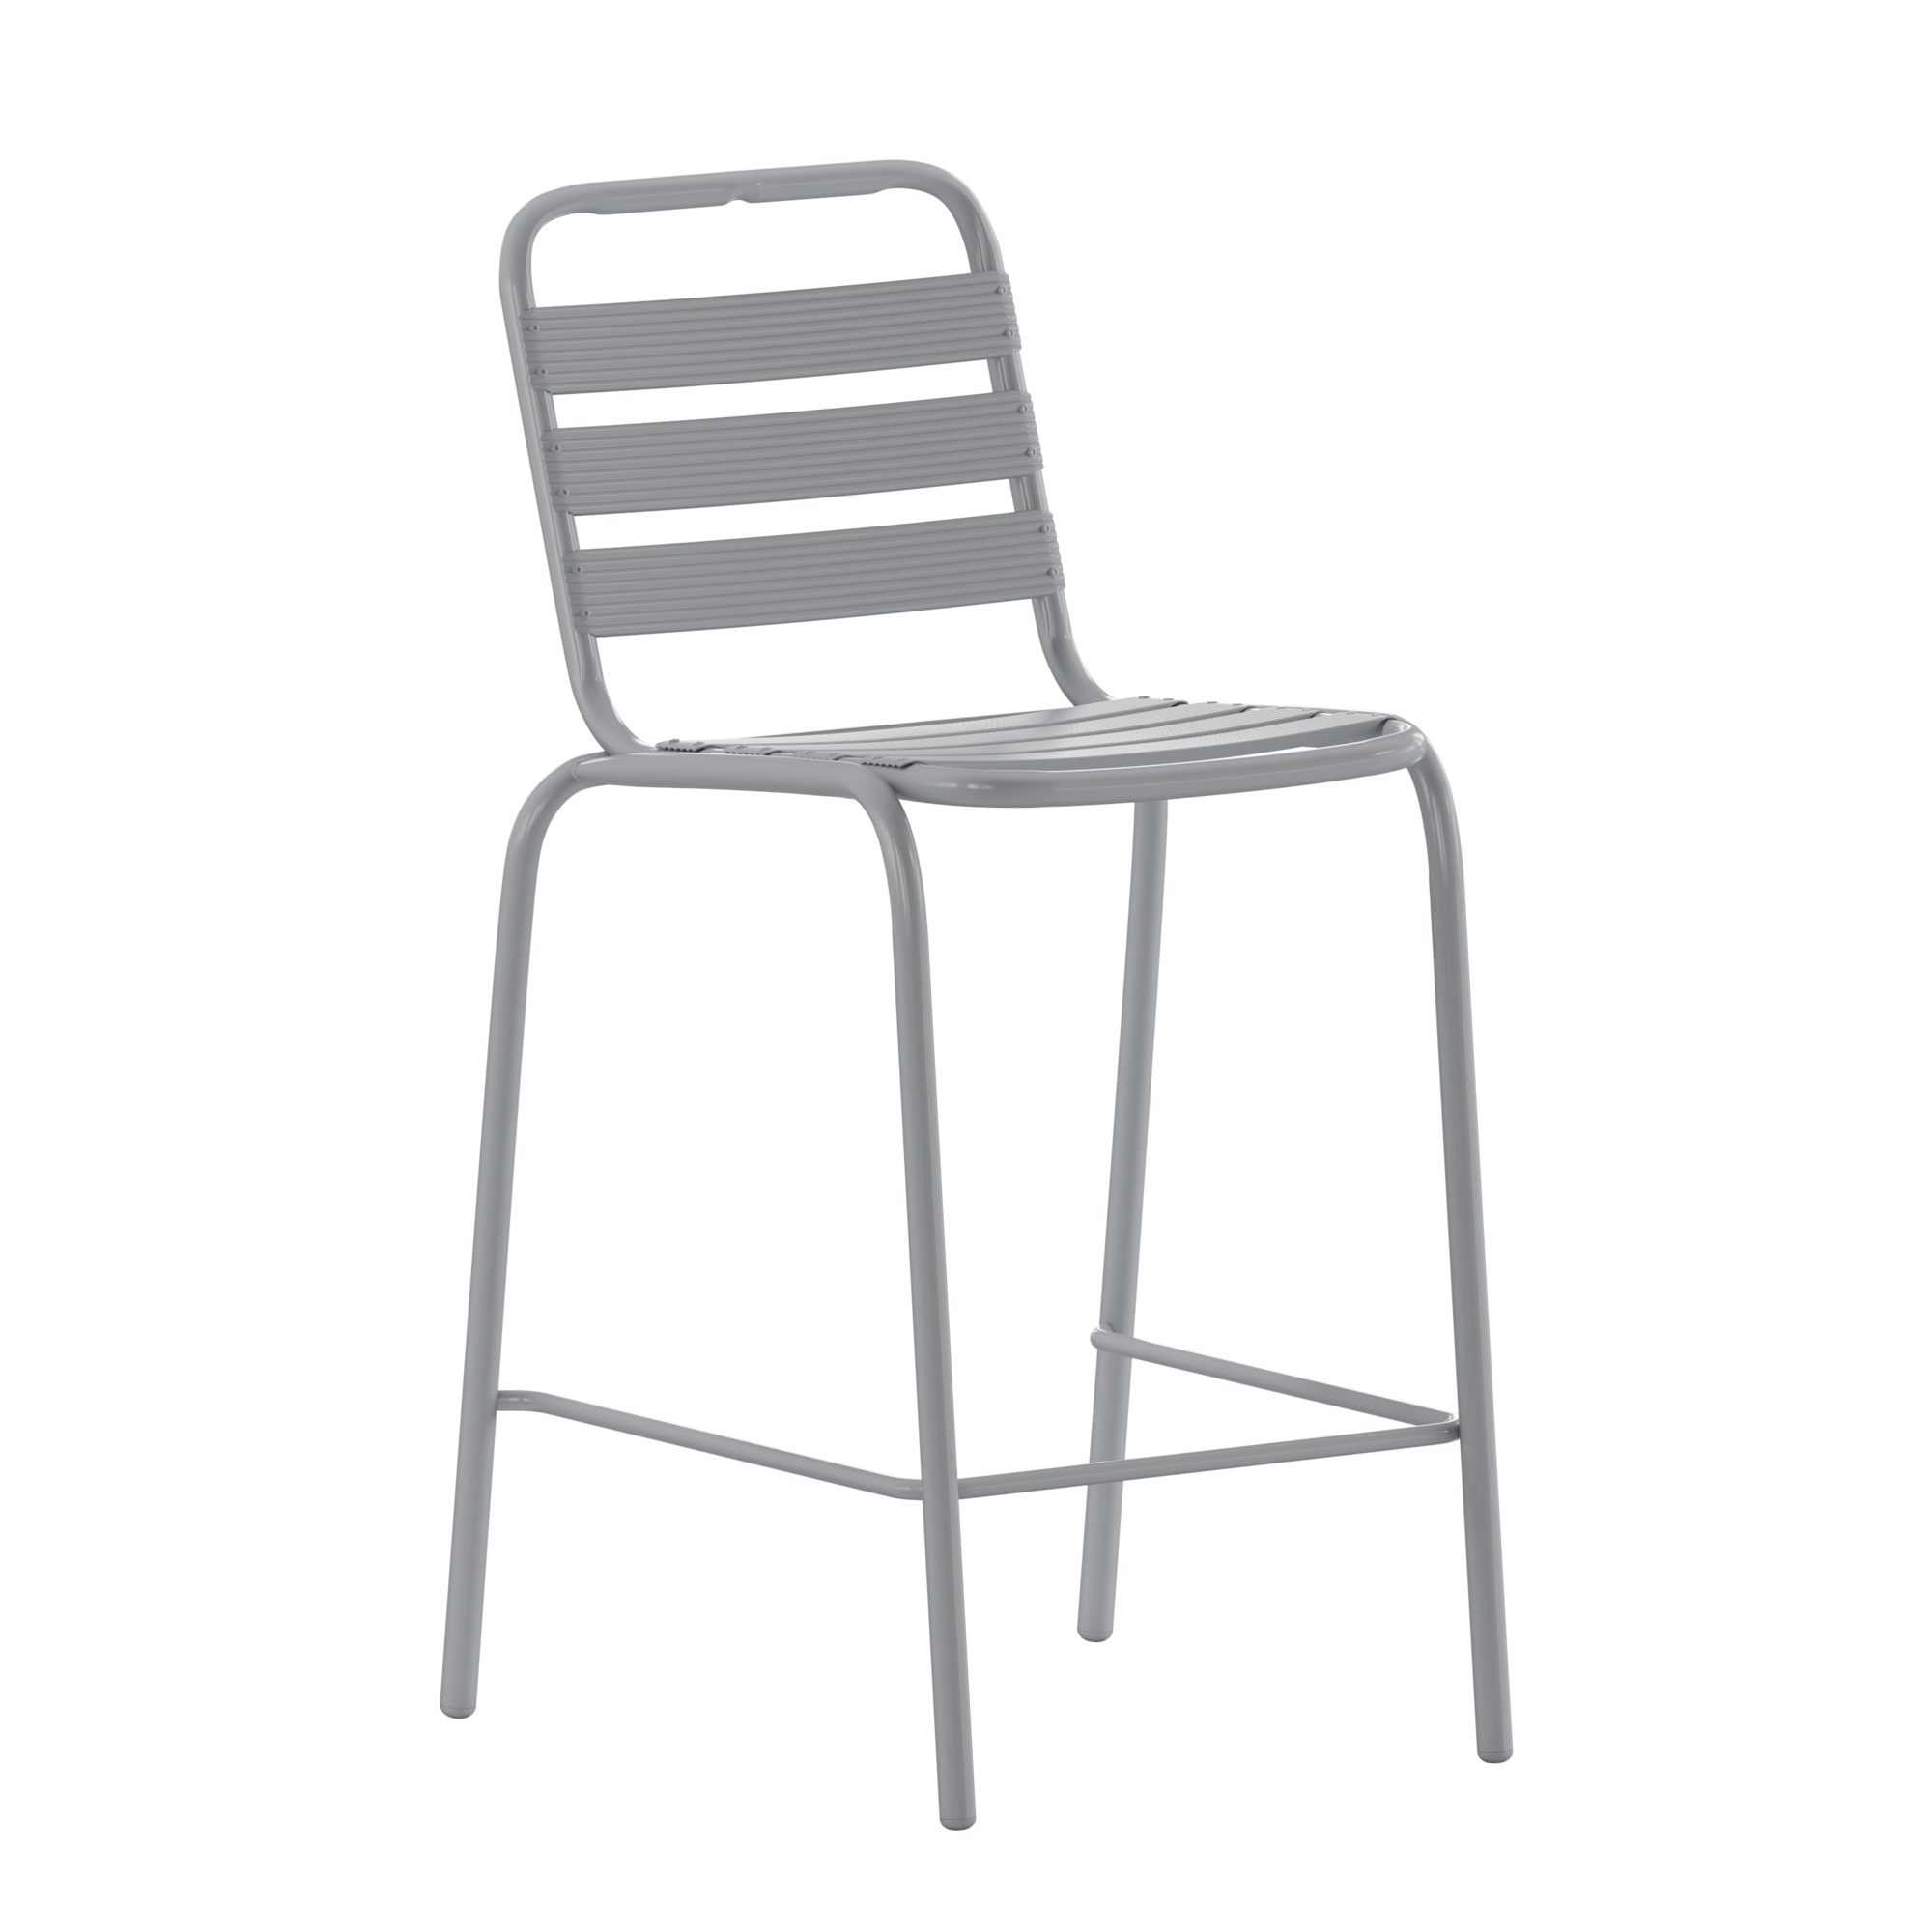 Flash Furniture, Commercial Silver Restaurant Stack Stool, Primary Color Gray, Material Aluminum, Width 22.75 in, Model TLH015H